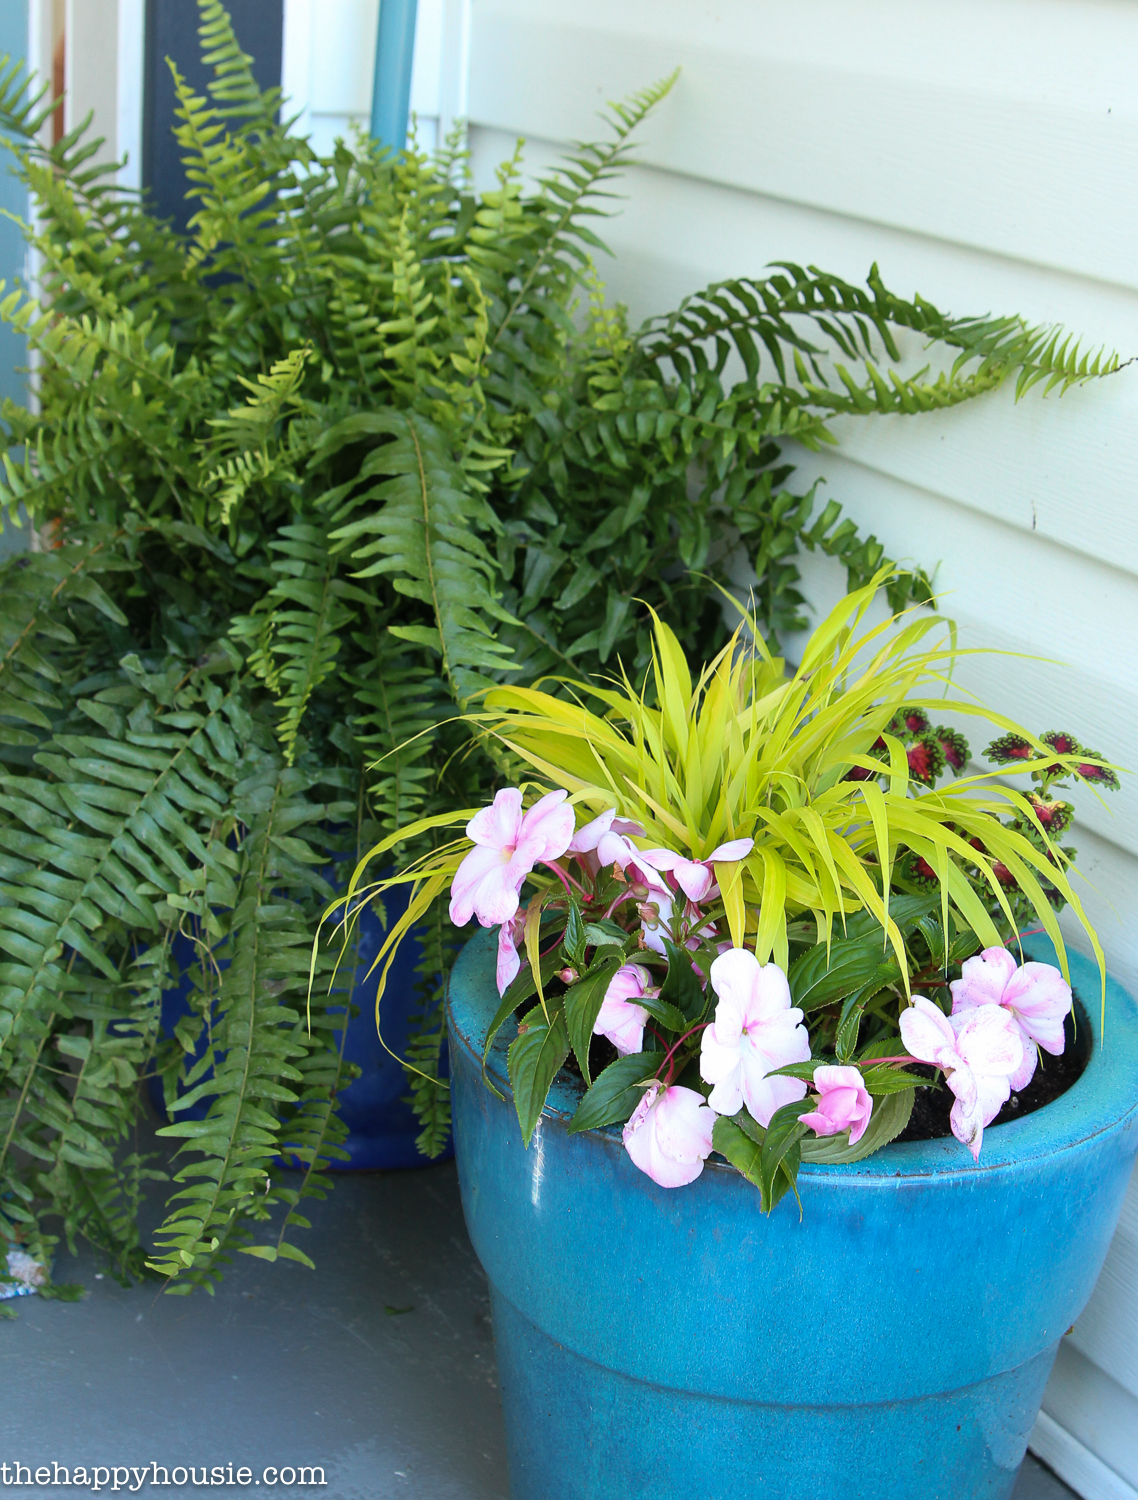 A large fern is in the corner of the porch.